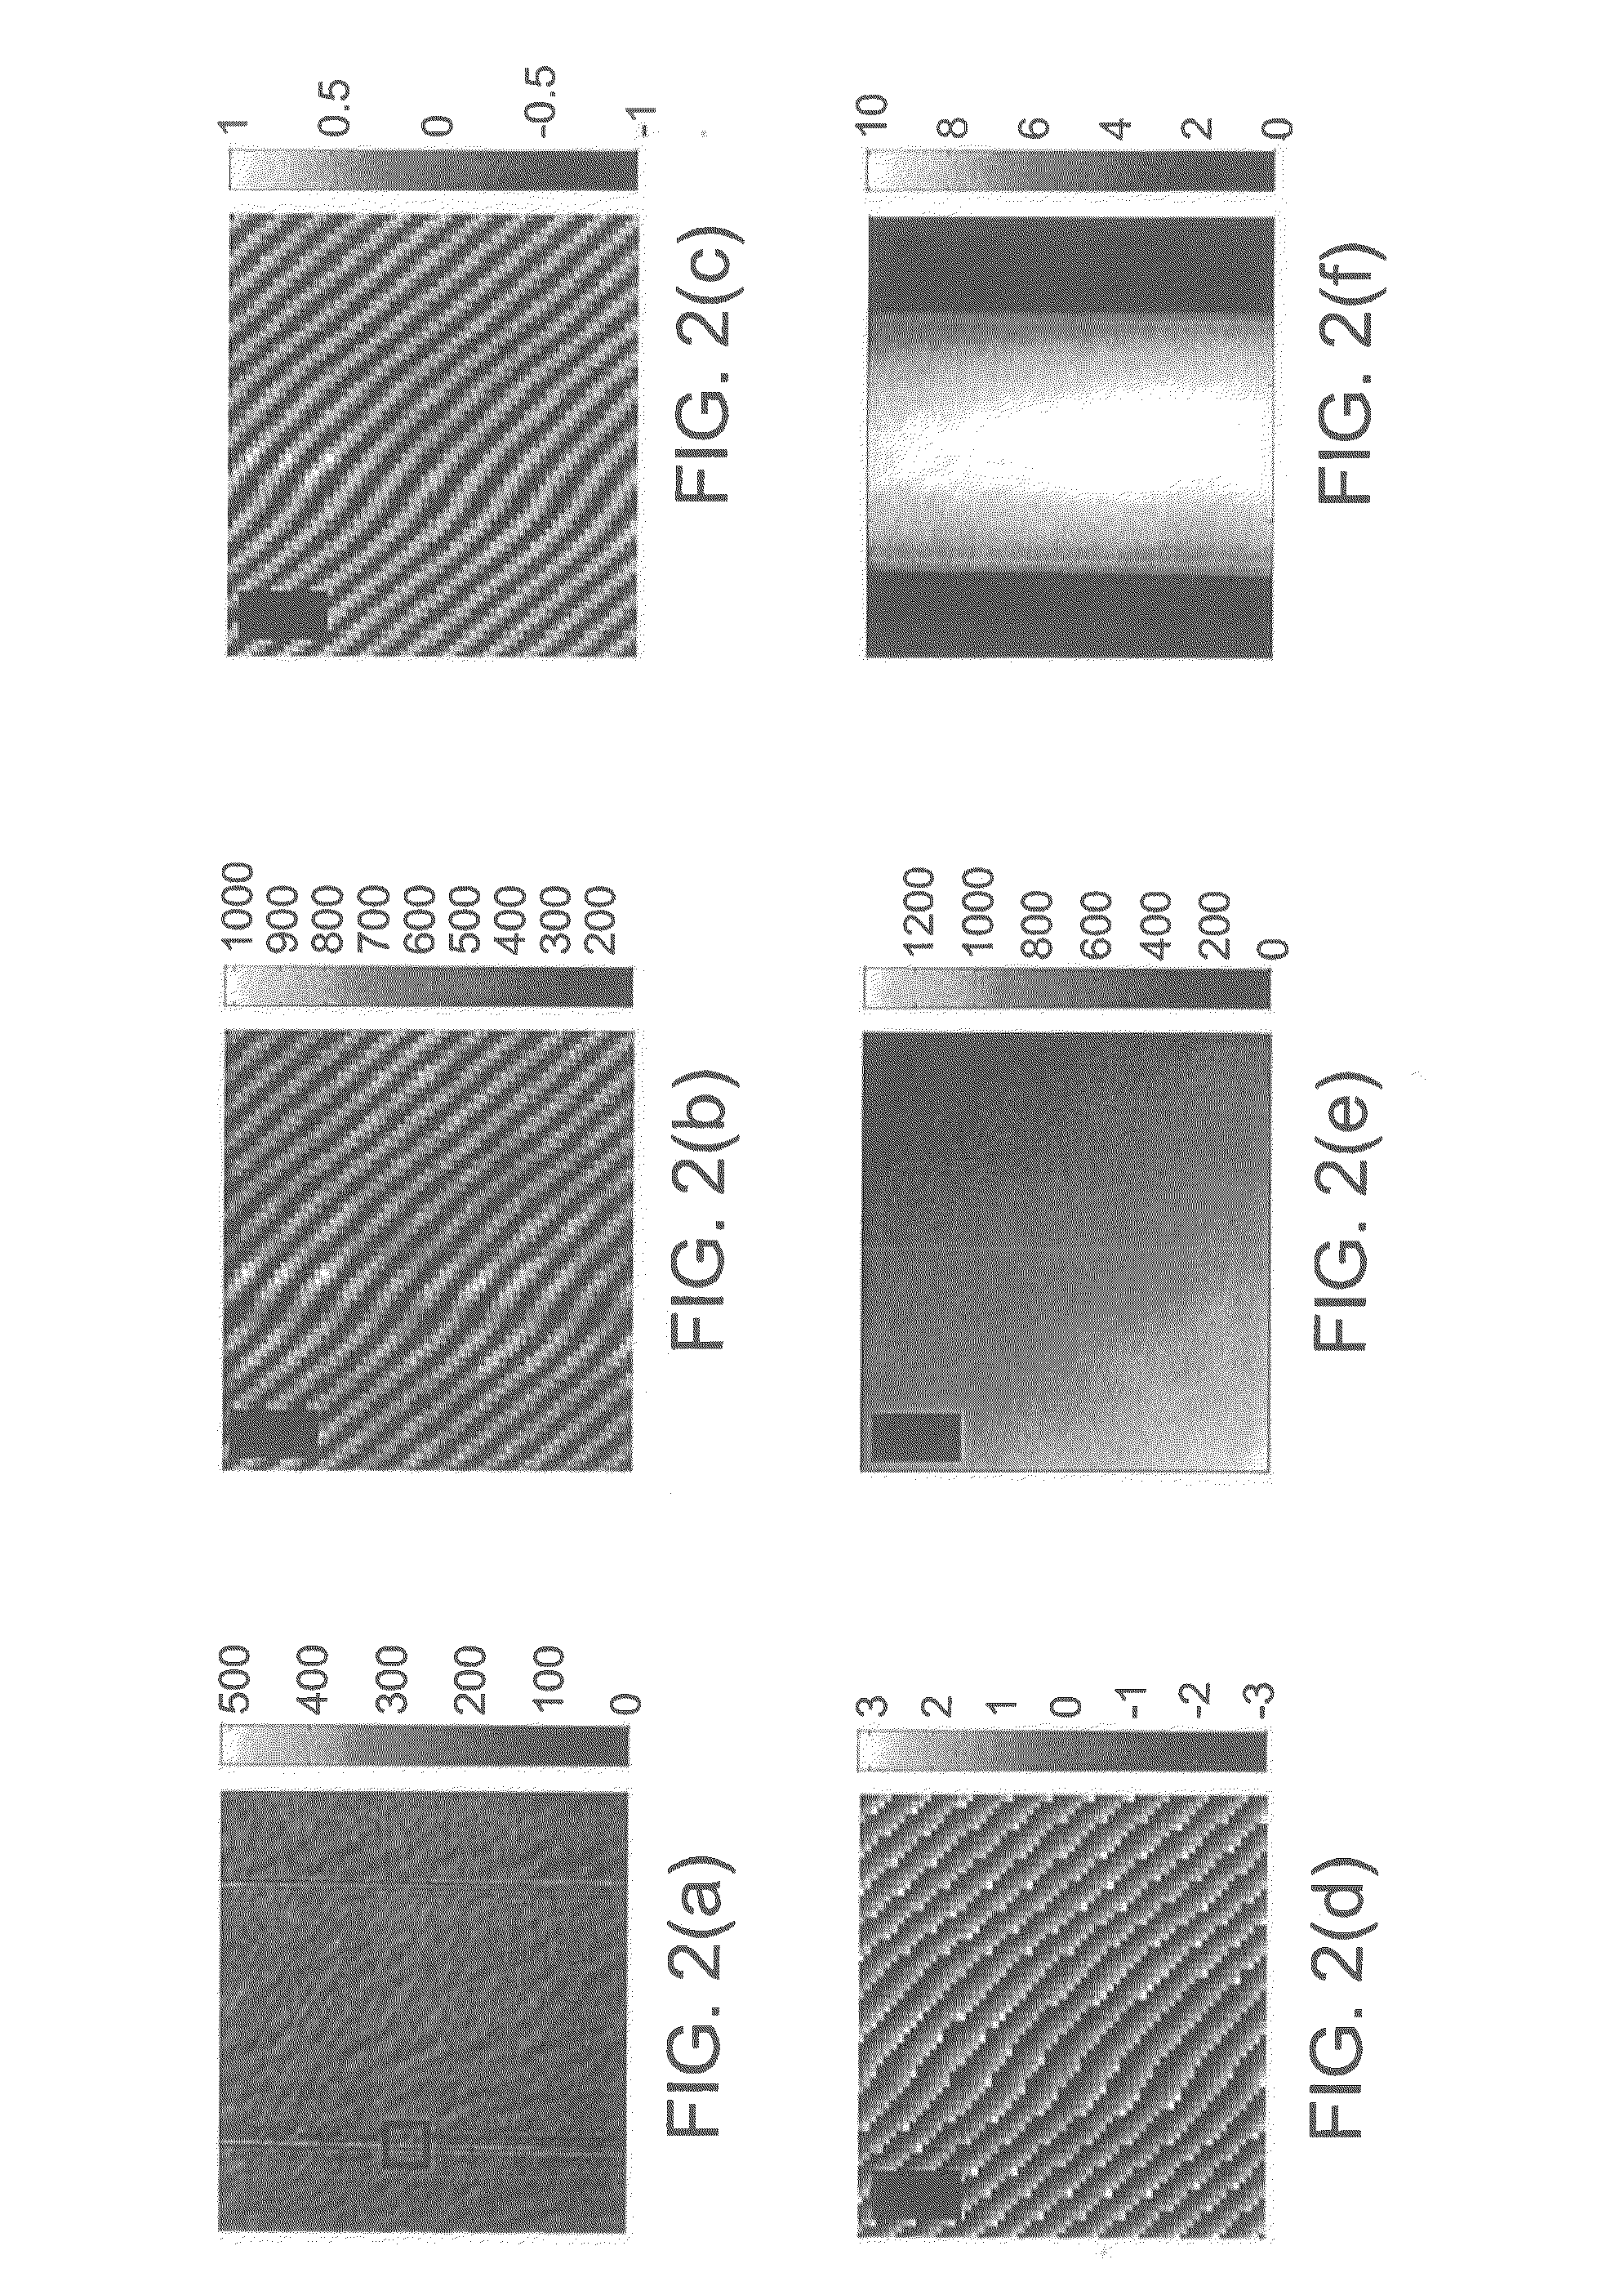 System and method for hilbert phase imaging